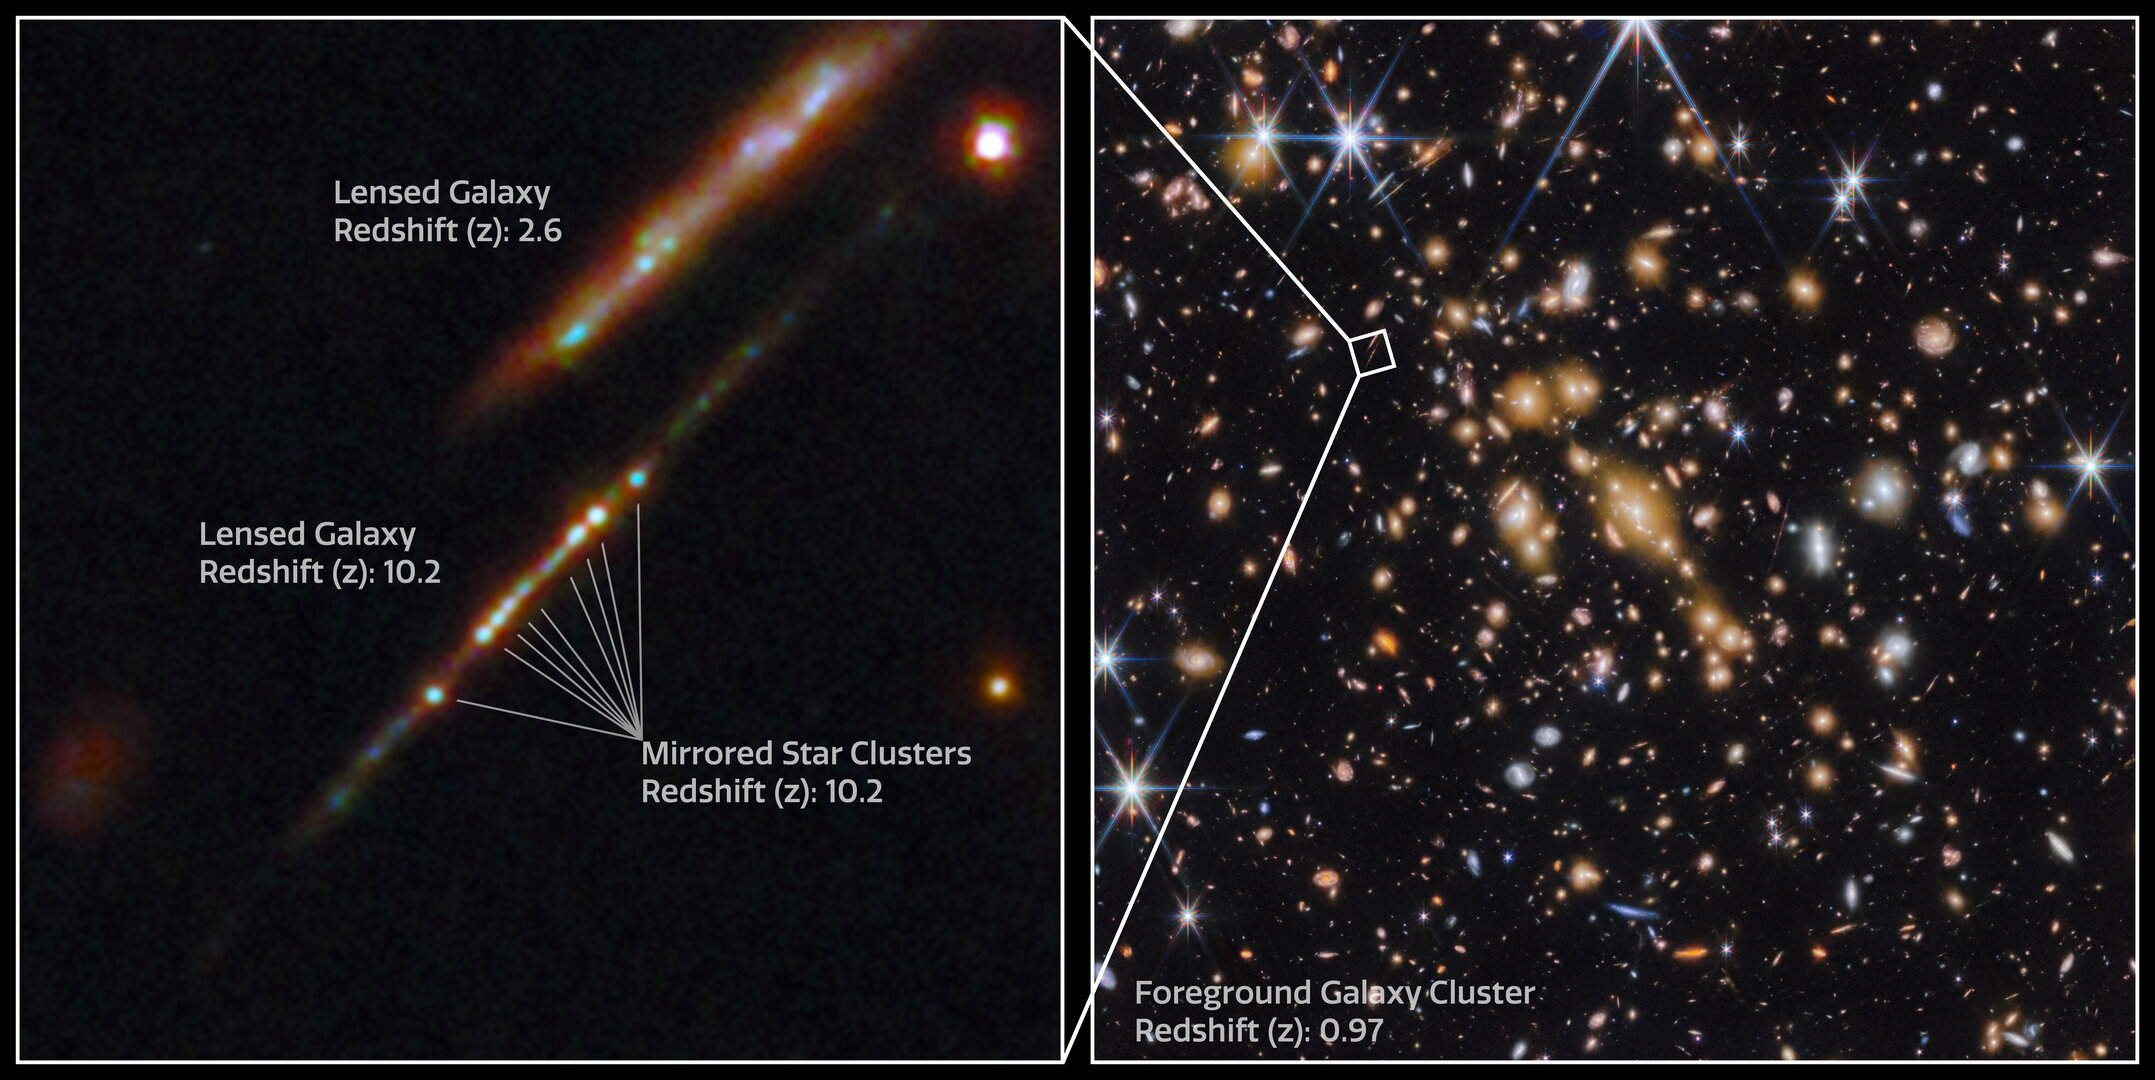 This image shows two panels. On the right is field of many galaxies on the black background of space, known as the galaxy cluster SPT-CL J0615−5746. On the left is a callout image from a portion of this galaxy cluster showing two distinct lensed galaxies. The Cosmic Gems arc is shown with several galaxy clusters